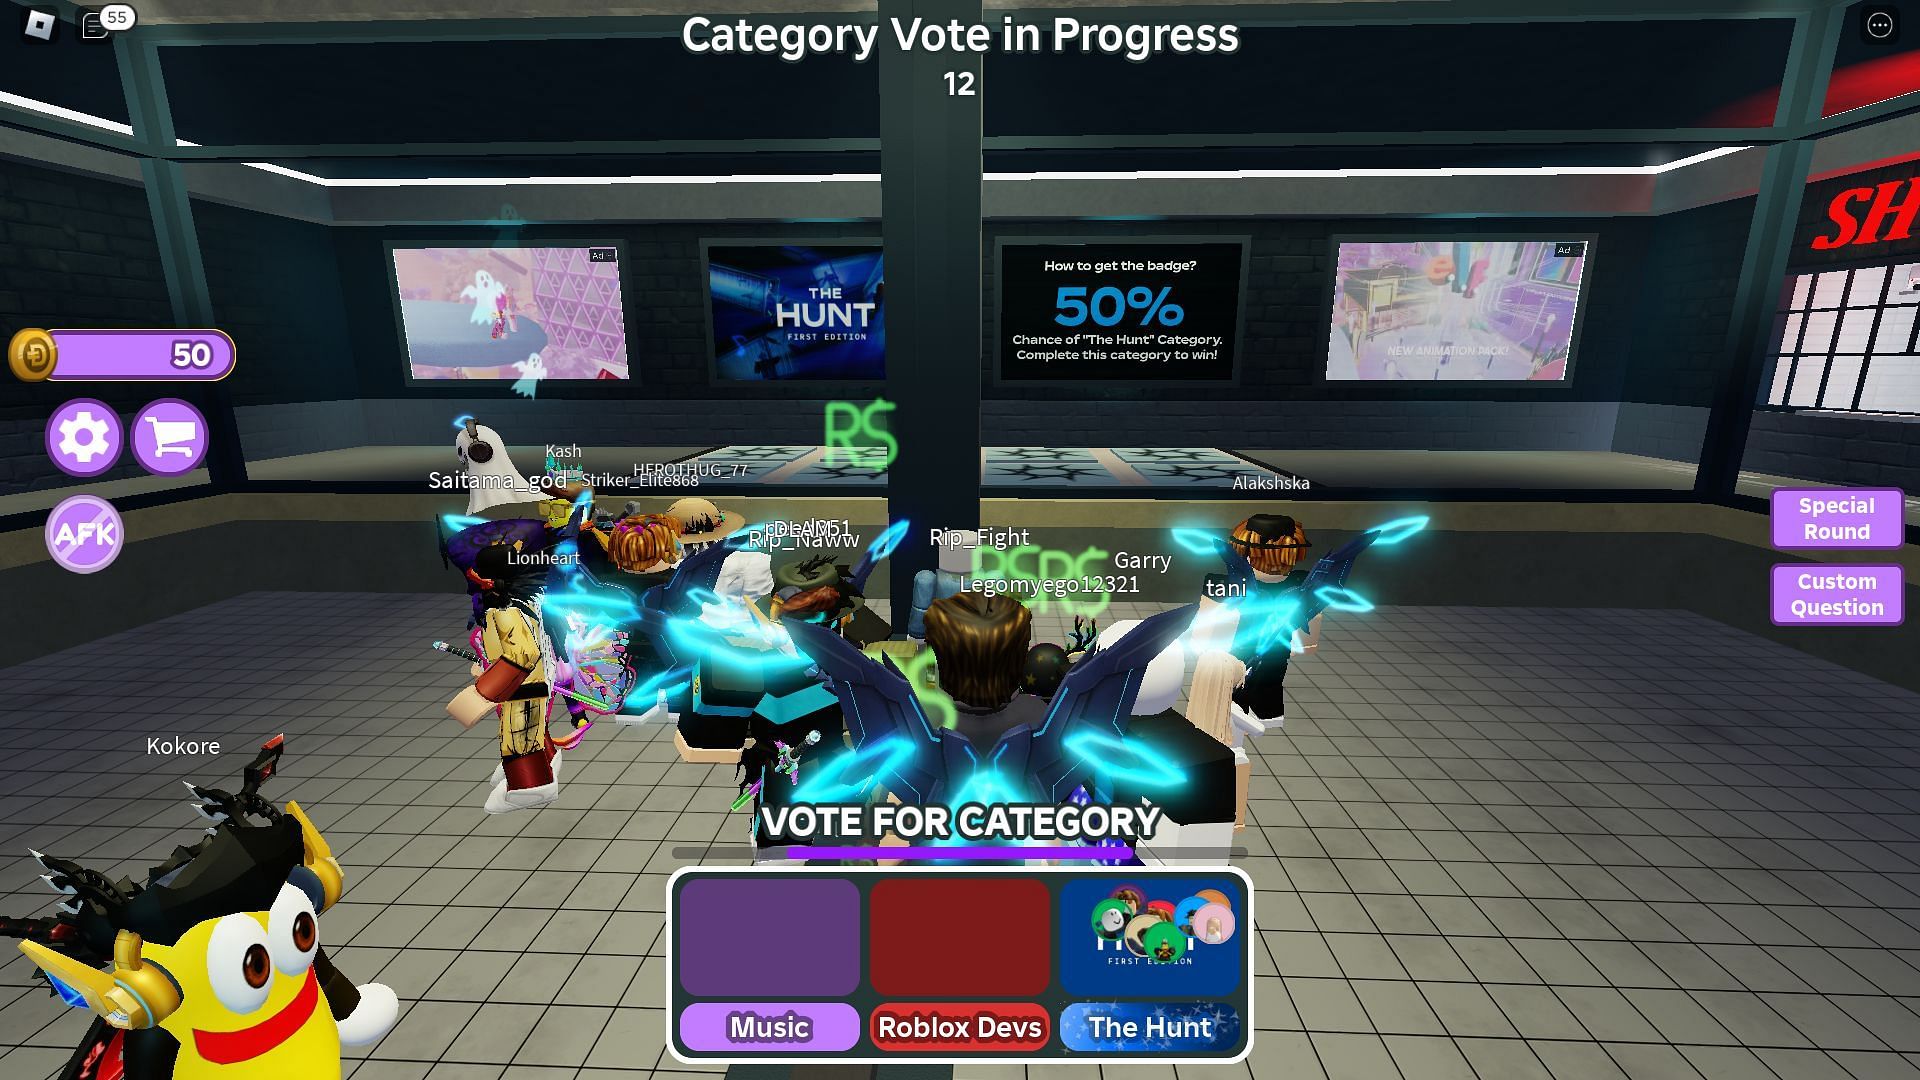 Voting for The Hunt (Image via Roblox)